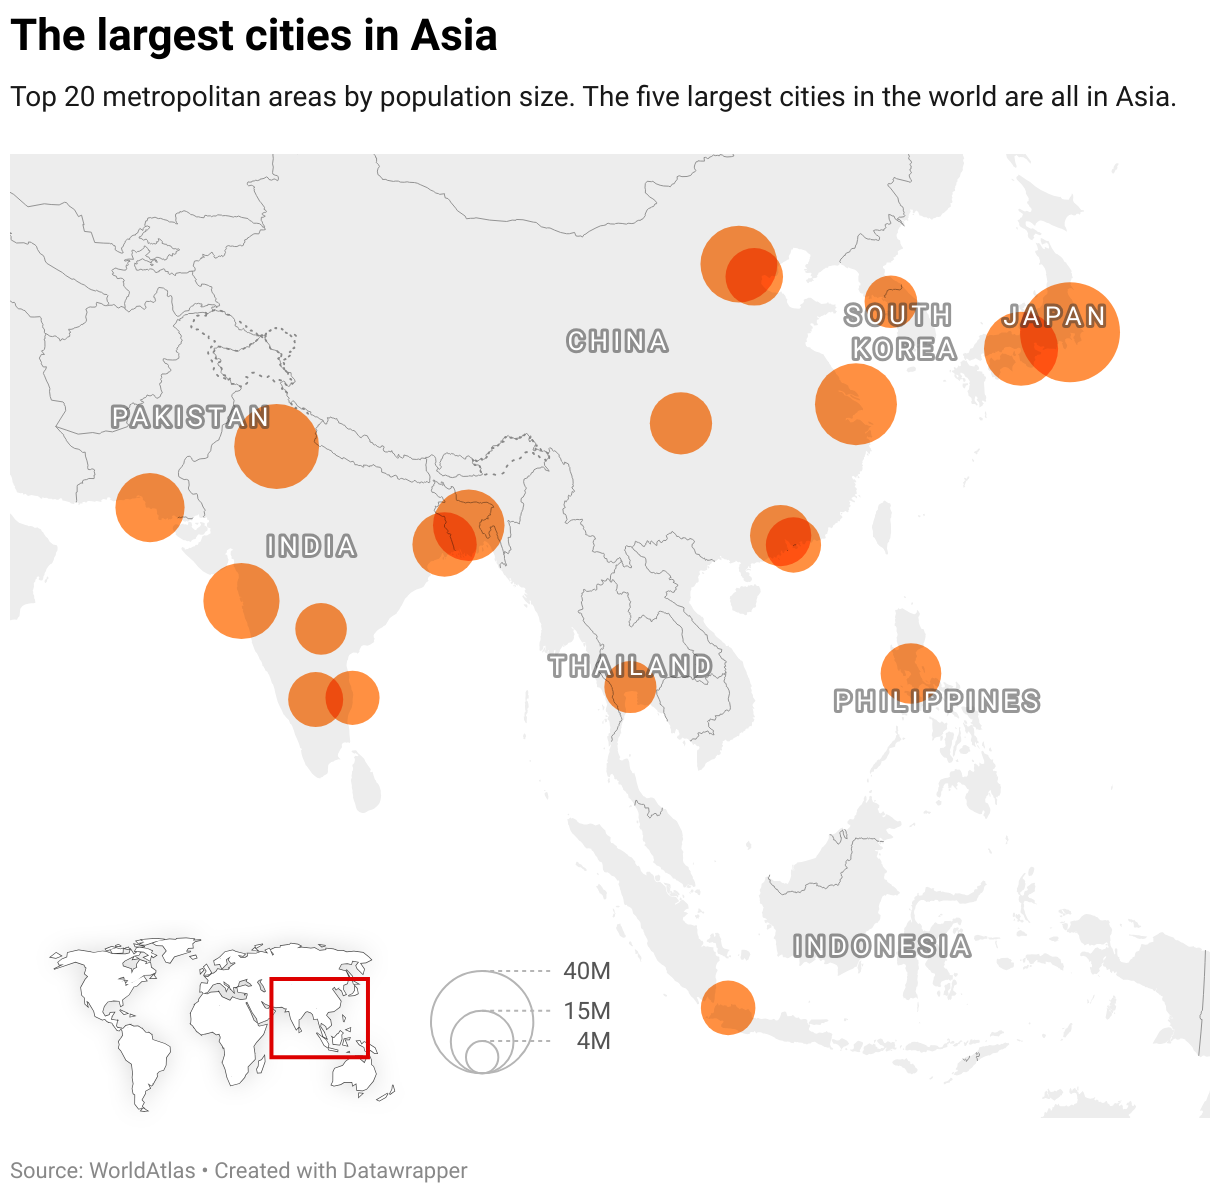 The largest cities in Asia